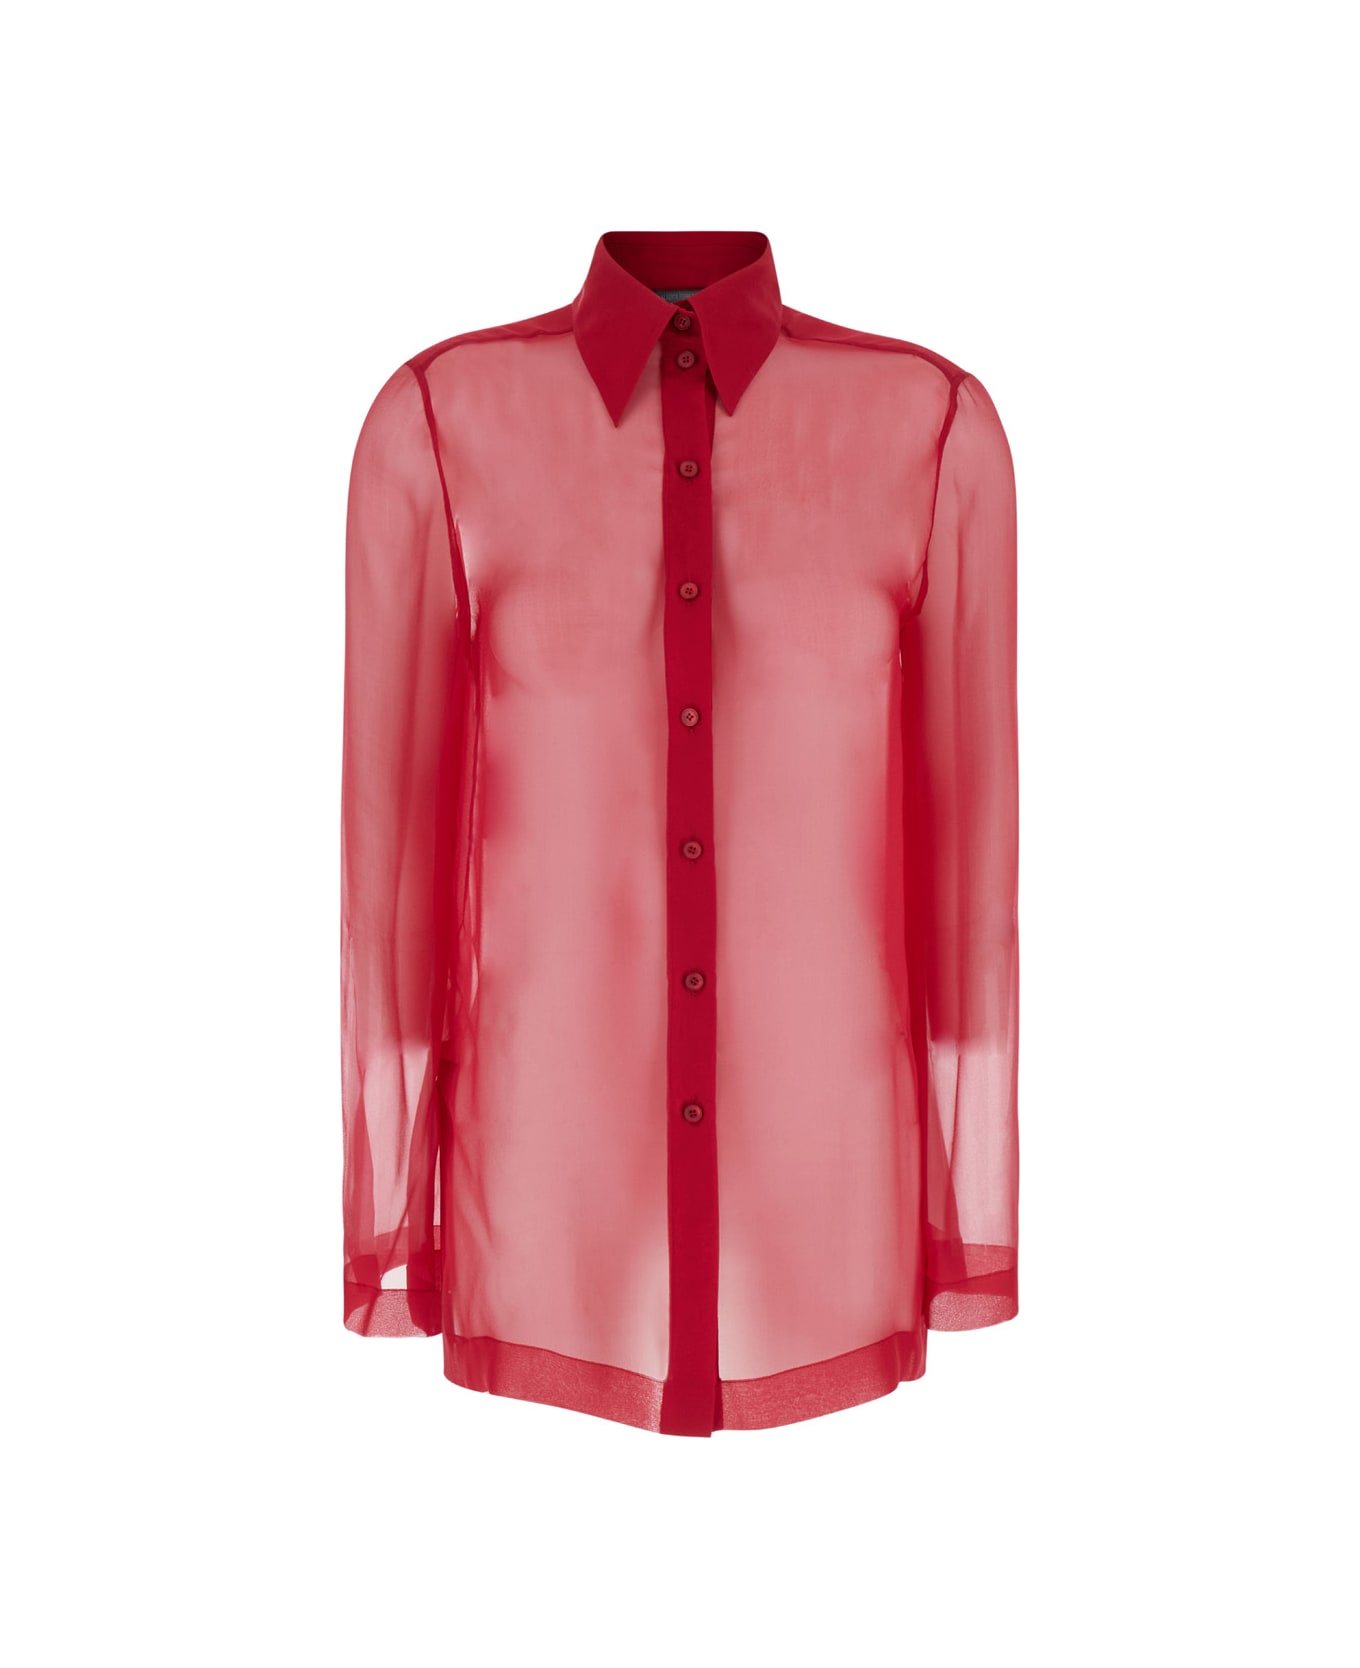 Alberta Ferretti Red Shirt With Pointed Collar In Chiffon Woman - Red